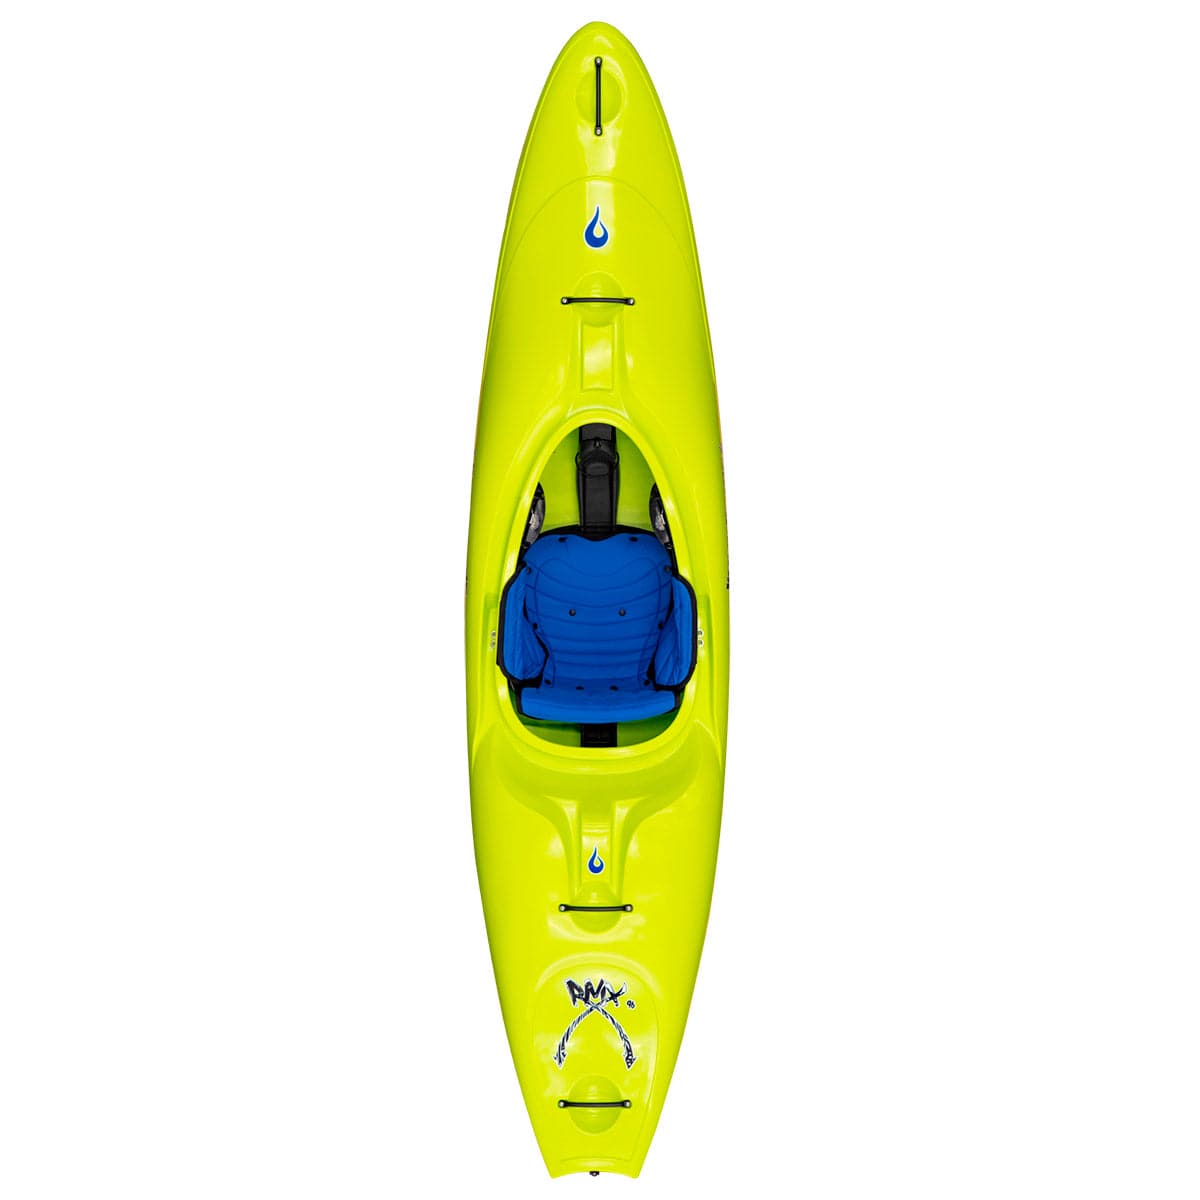 Featuring the RMX creek boat, liquid logic, remix, river runner kayak manufactured by LiquidLogic shown here from one angle.